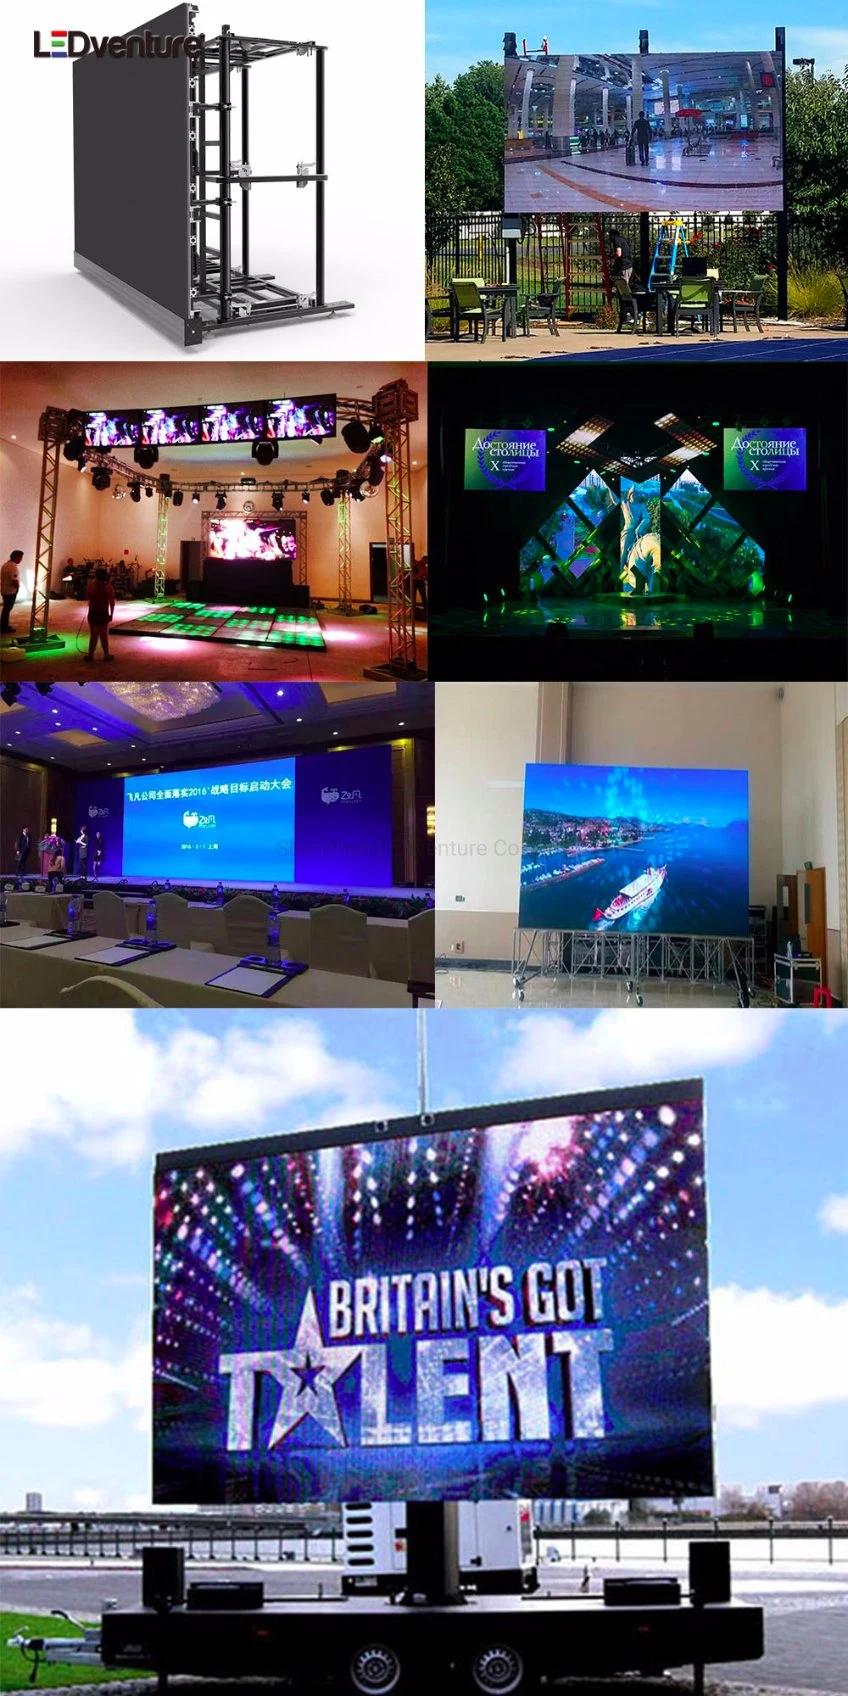 Outdoor Full Color P2.6 Rental Screen LED Display Panel for Stage